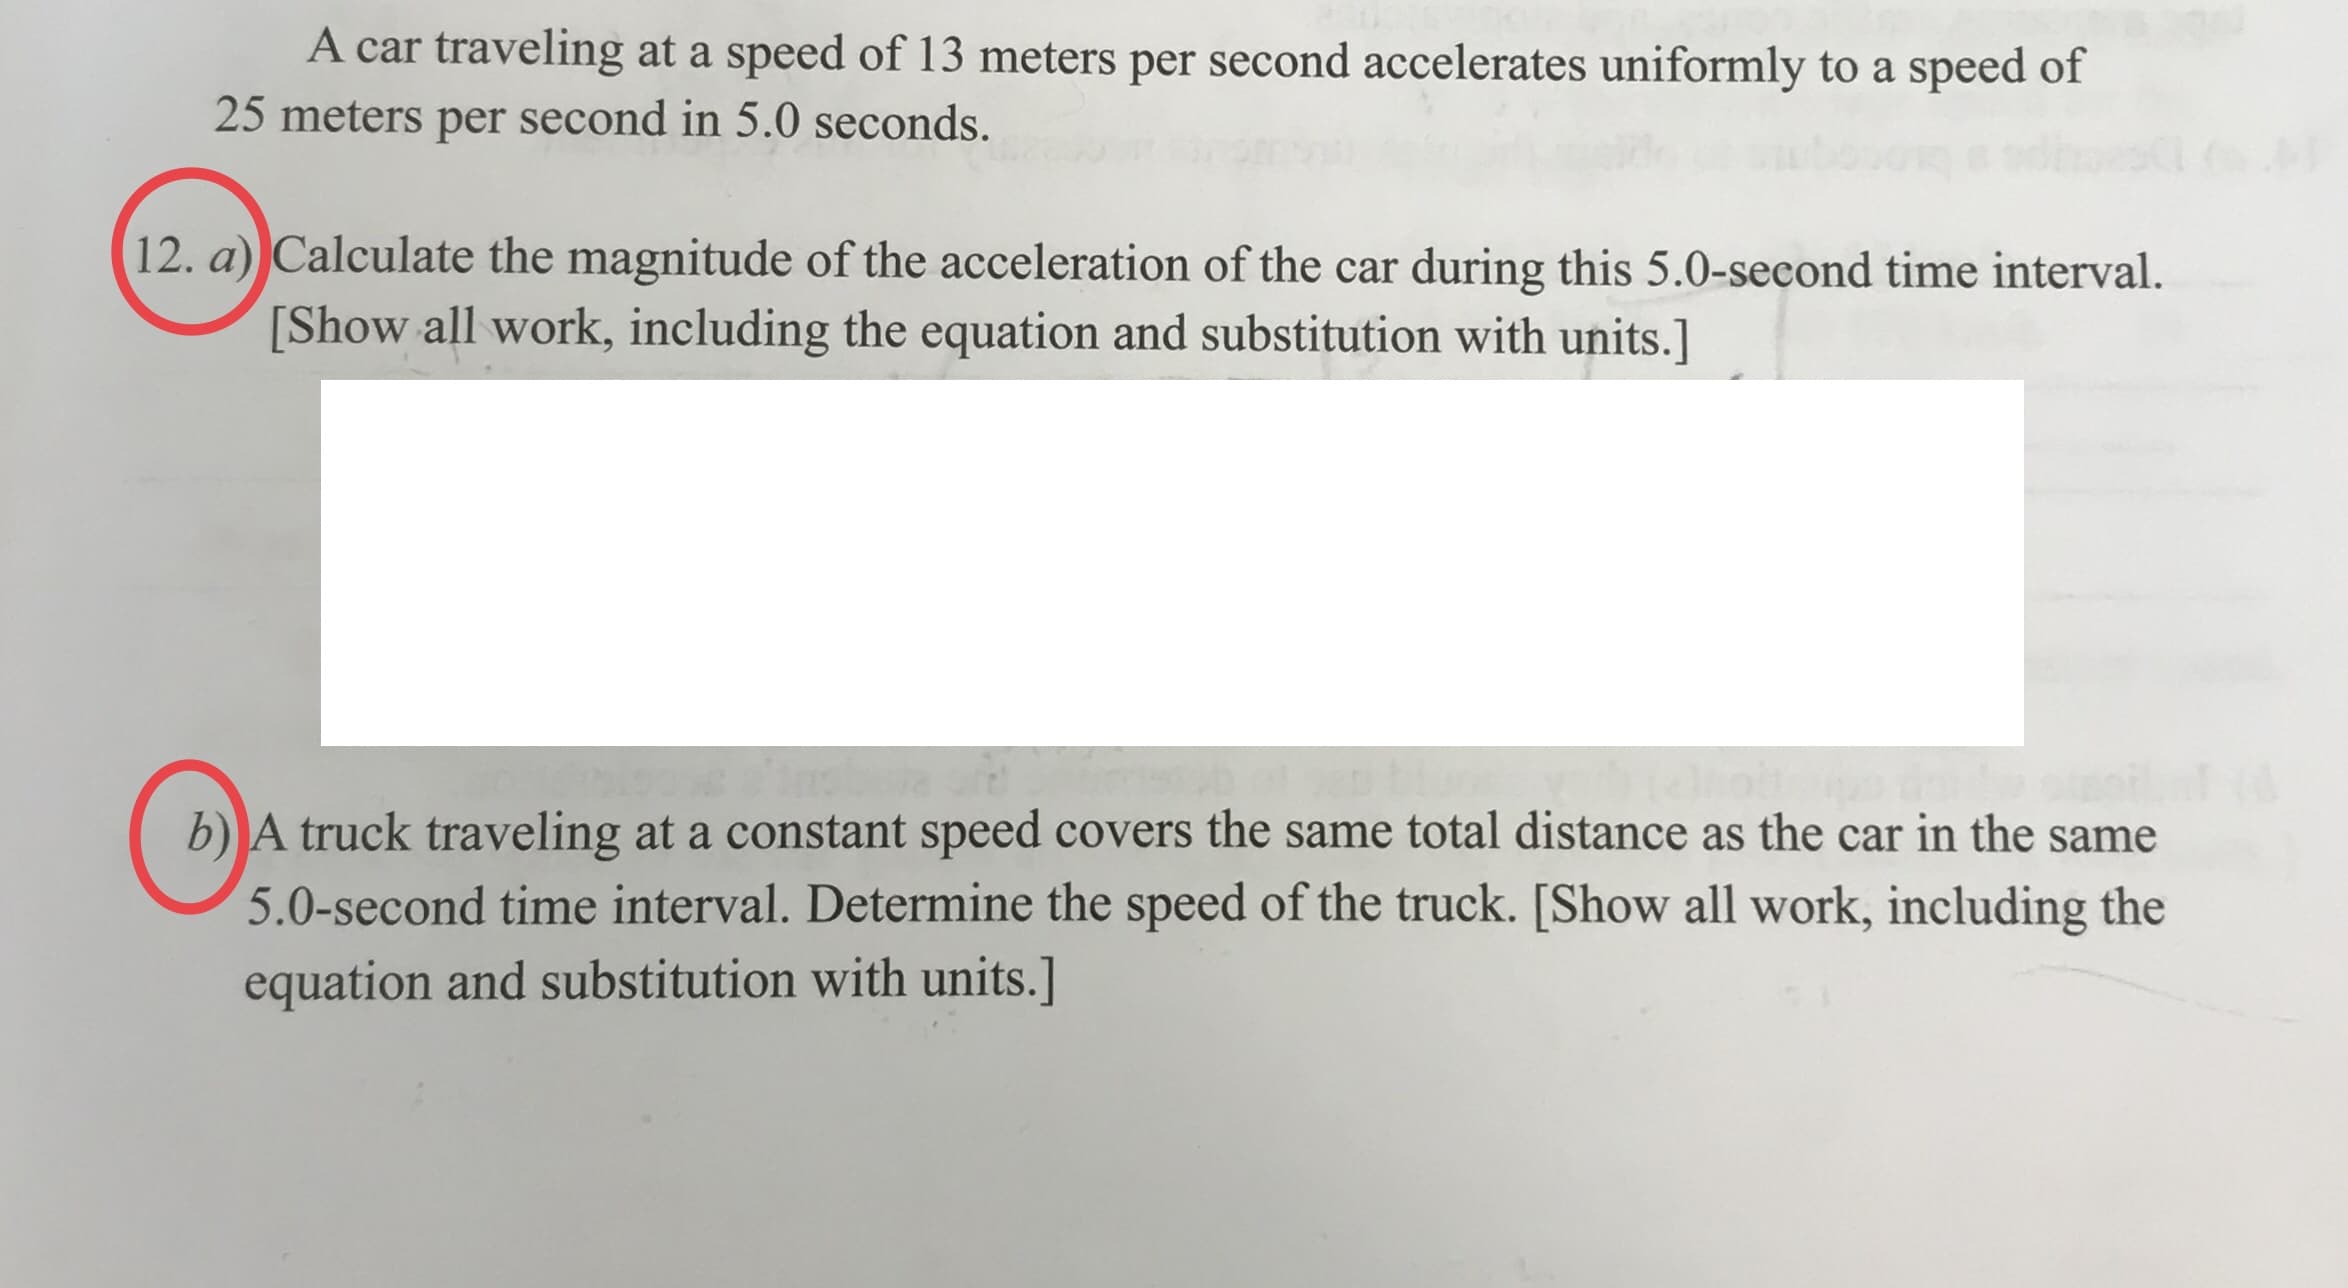 A car traveling at a speed of 13 meters per second accelerates uniformly to a speed of
25 meters per second in 5.0 seconds.
12. a) Calculate the magnitude of the acceleration of the car during this 5.0-second time interval.
[Show all work, including the equation and substitution with units.]
b) A truck traveling at a constant speed covers the same total distance as the car in the same
5.0-second time interval. Determine the speed of the truck. [Show all work, including the
equation and substitution with units.]
